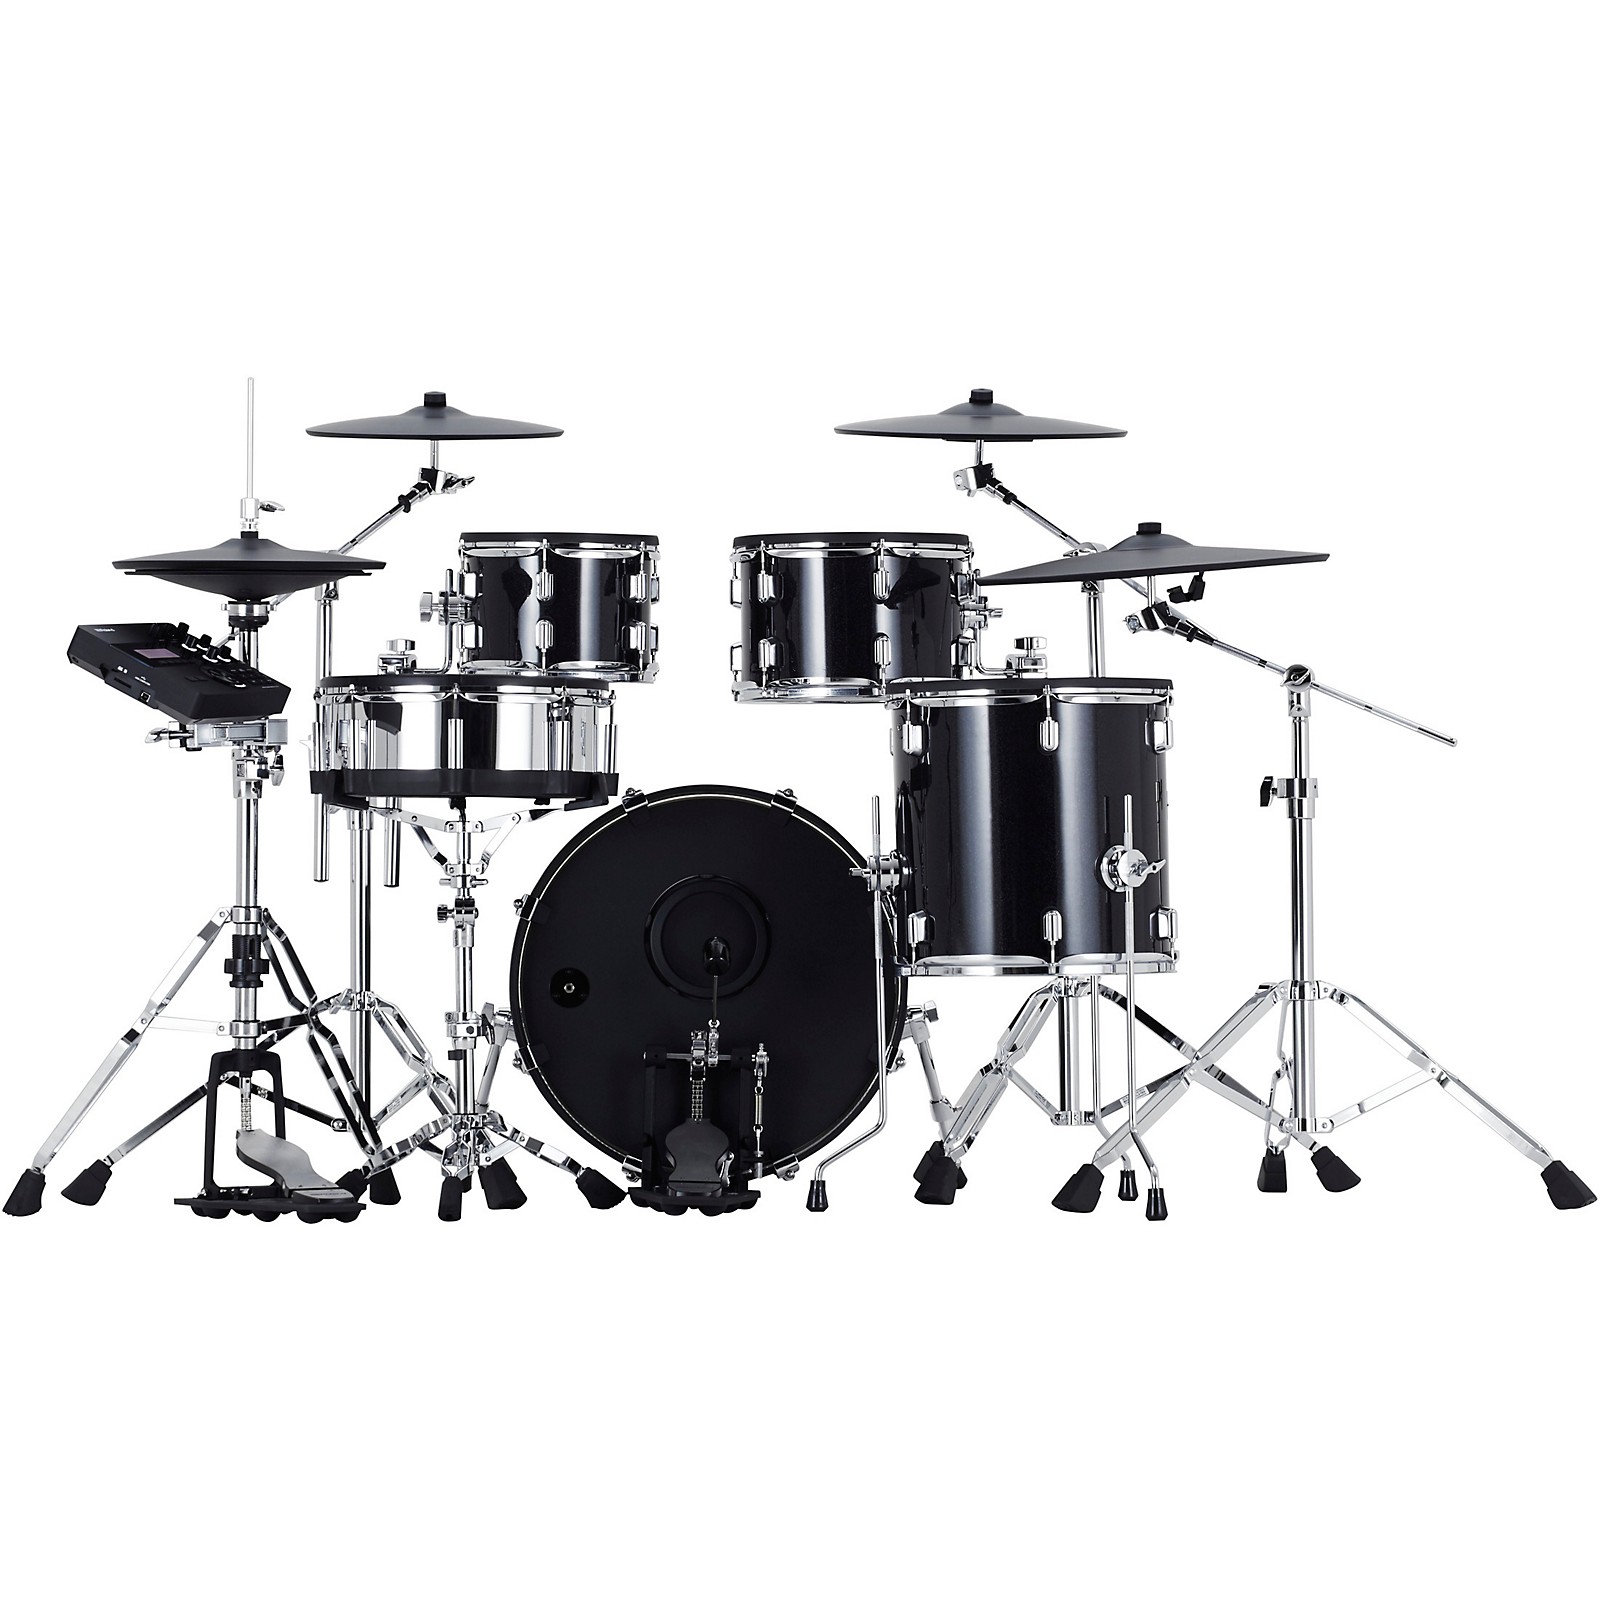 Drum Sets - Acoustic Drums - Drums - Musical Instruments - Products -  Yamaha USA